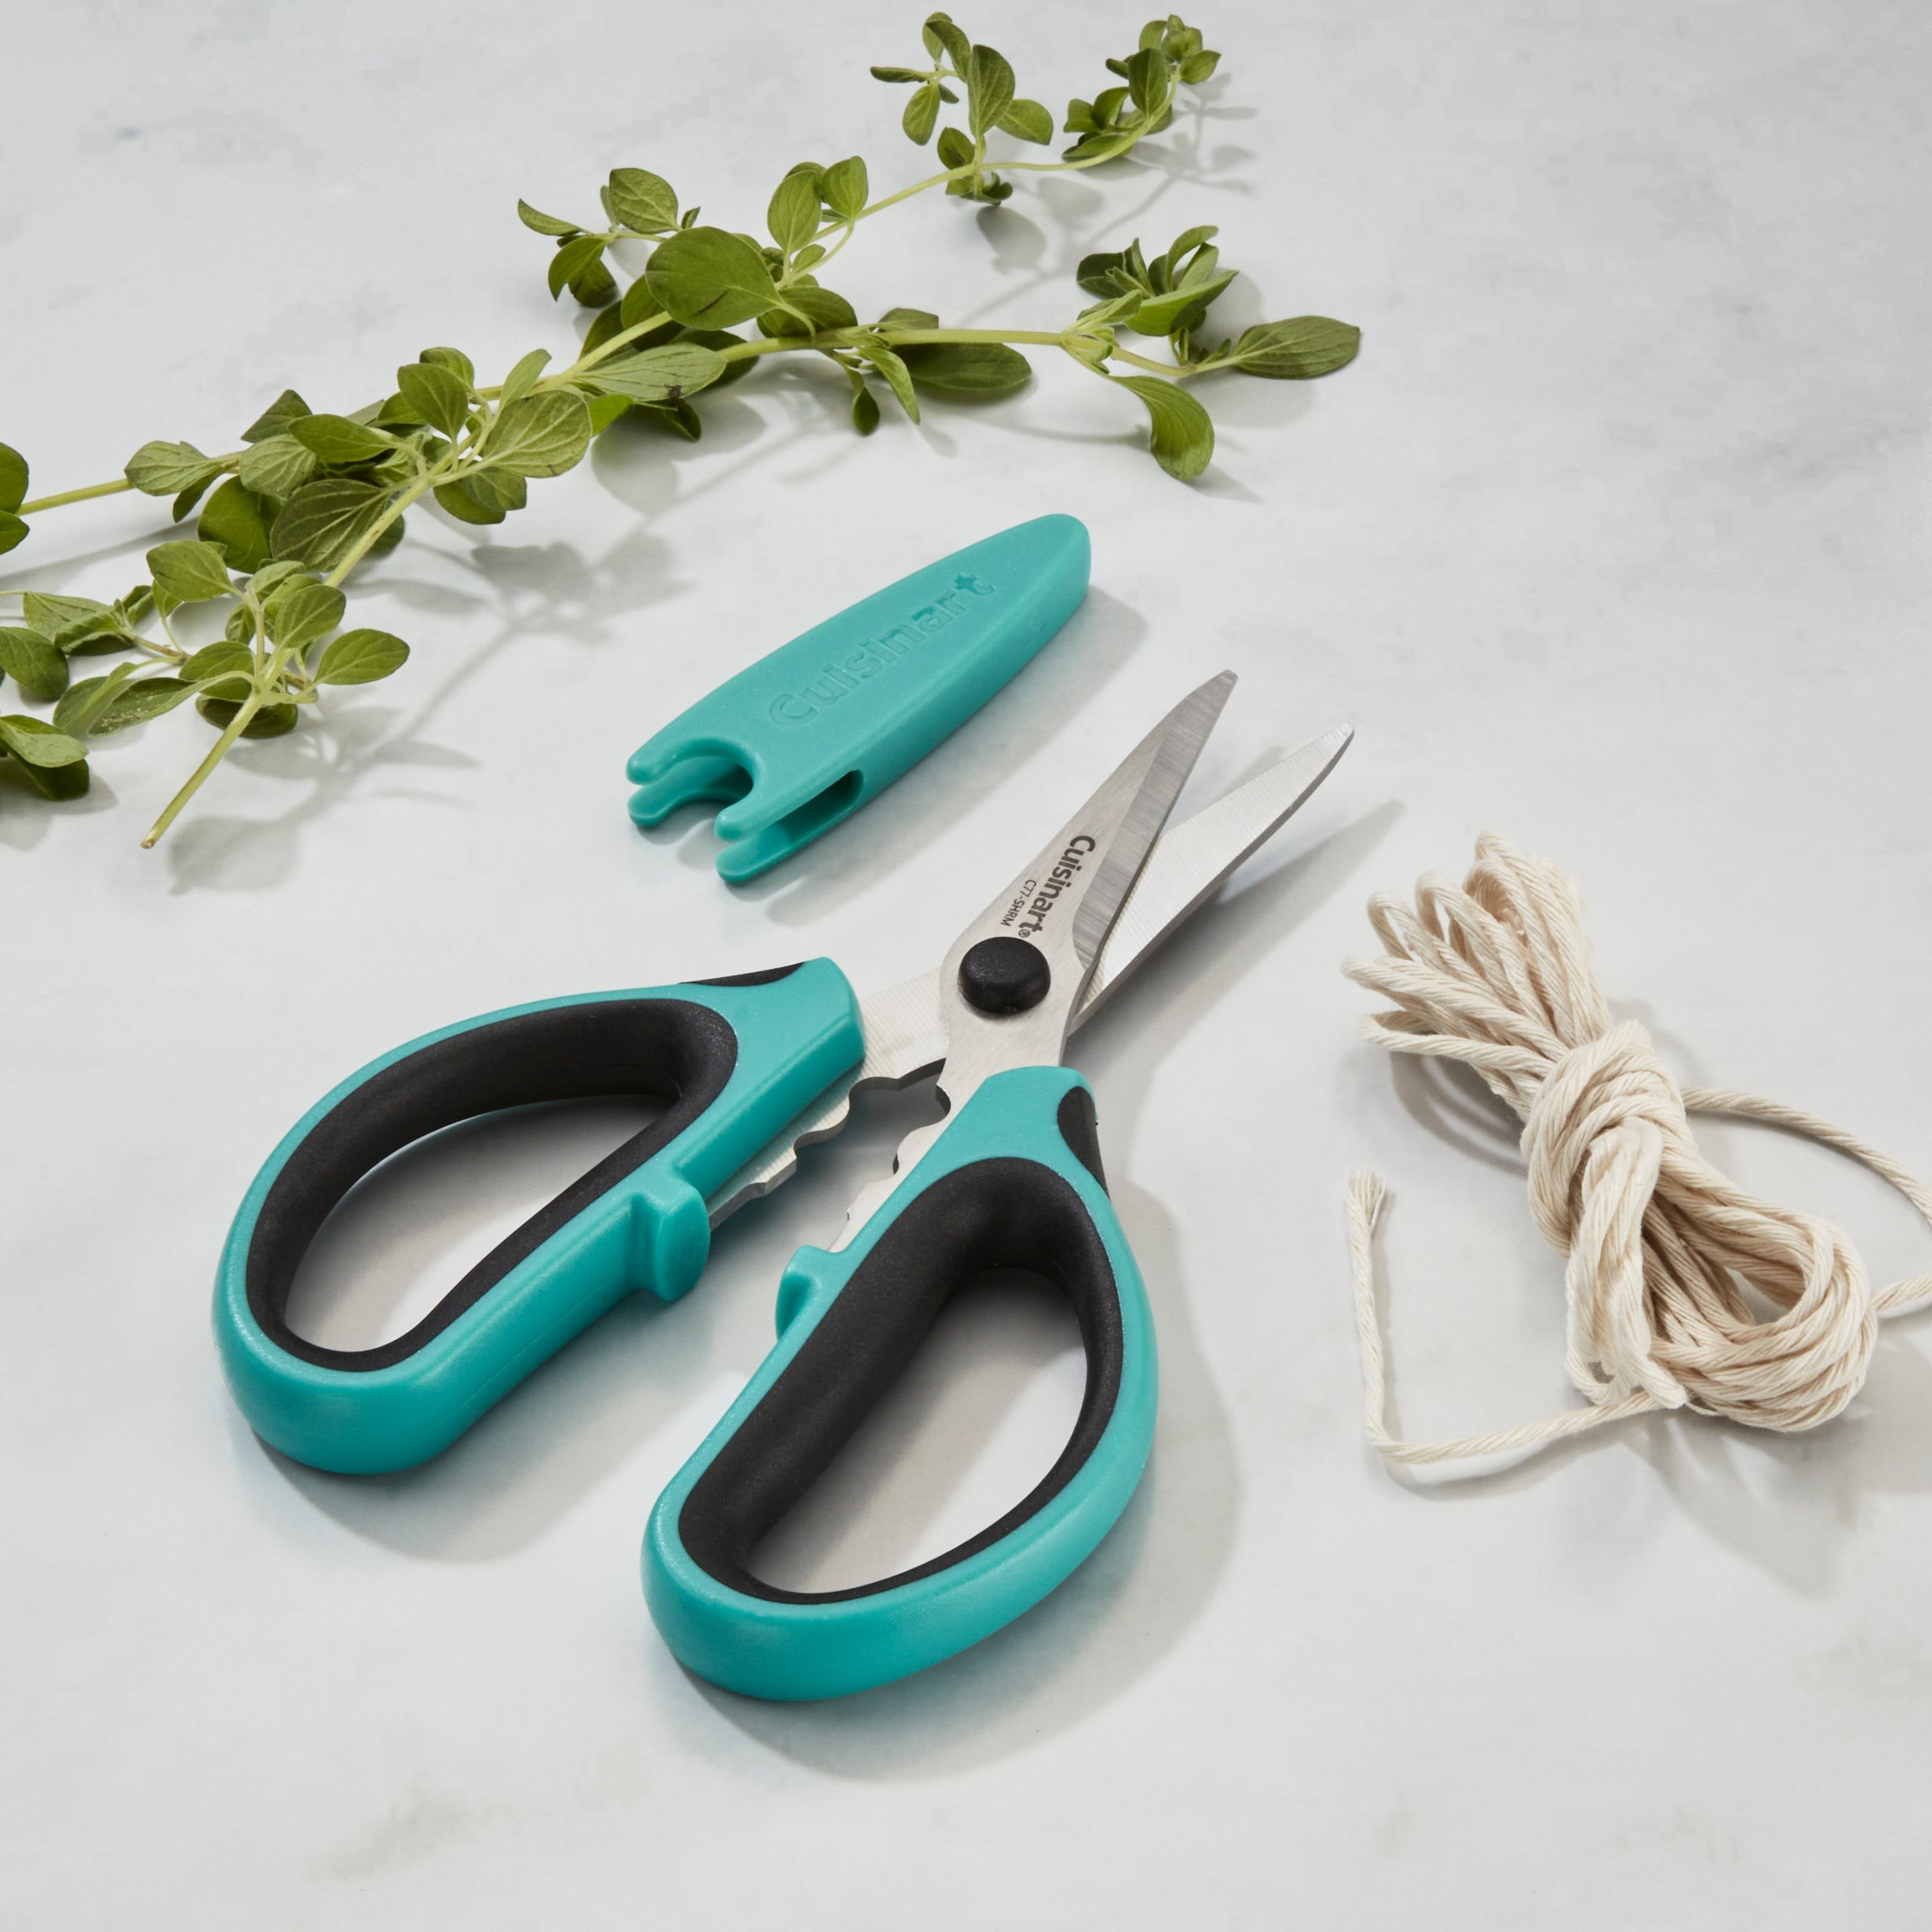 Cuisinart 6" All-Purpose/Herb Shears with Soft-Grip Handles